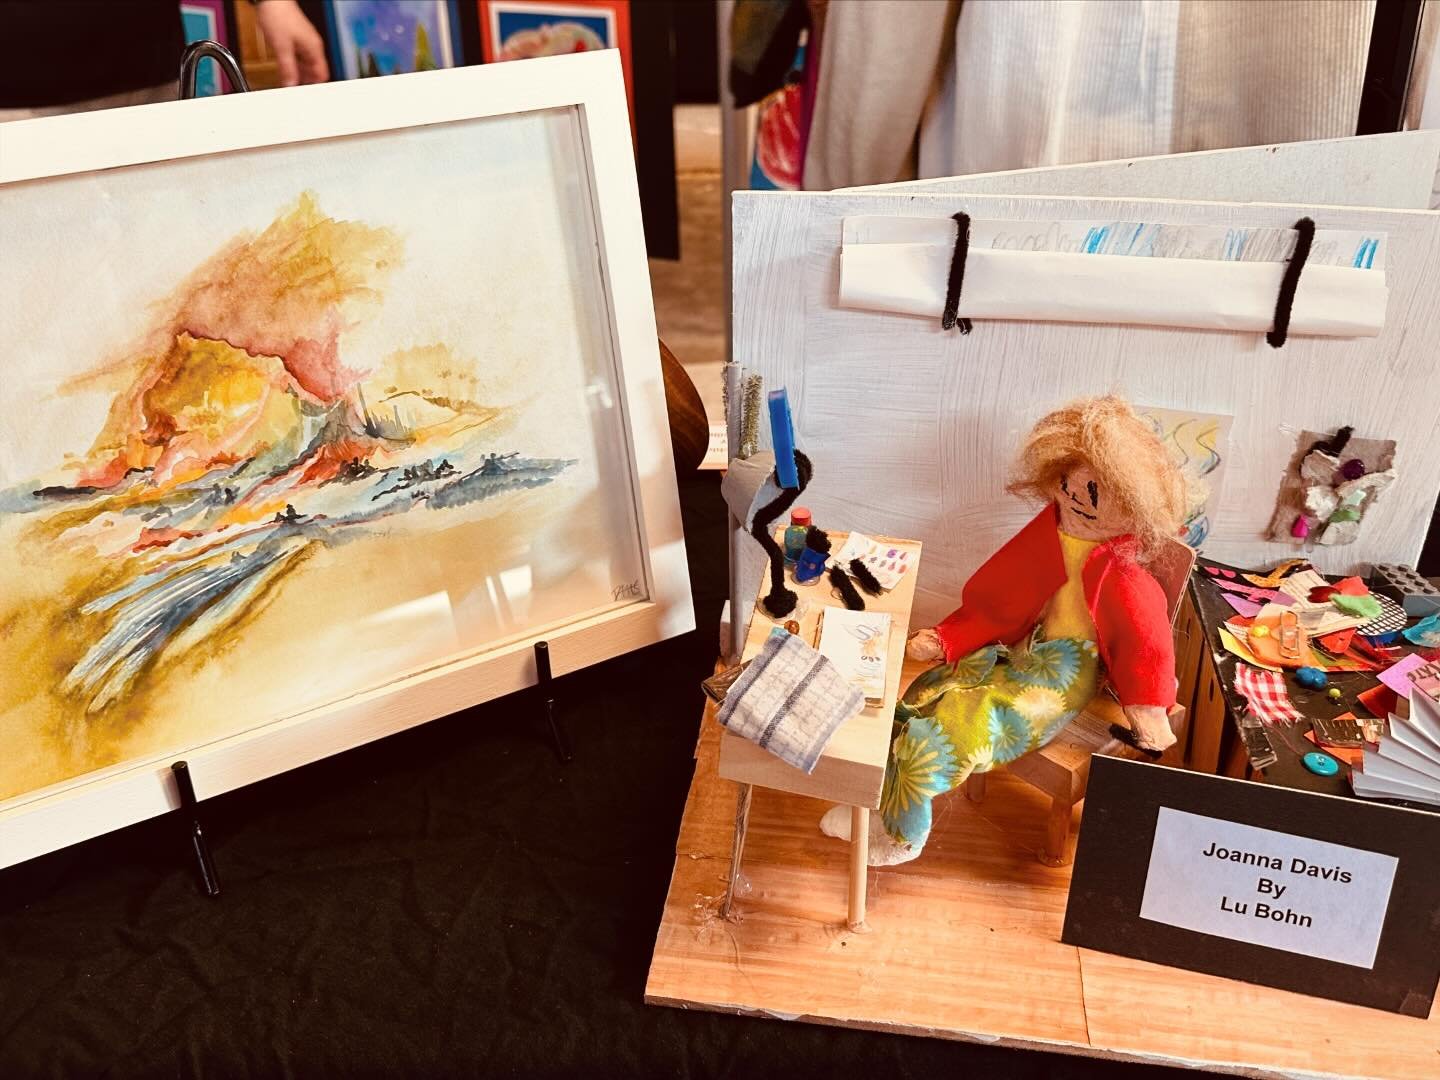 Miniature artists everywhere!! Swipe left to take a look at some fellow Lancaster artists in their tiny studios. See if you can identify them or their artwork. (Answers below)

I&rsquo;m so impressed with this art project that @gwendolyn11 puts toget